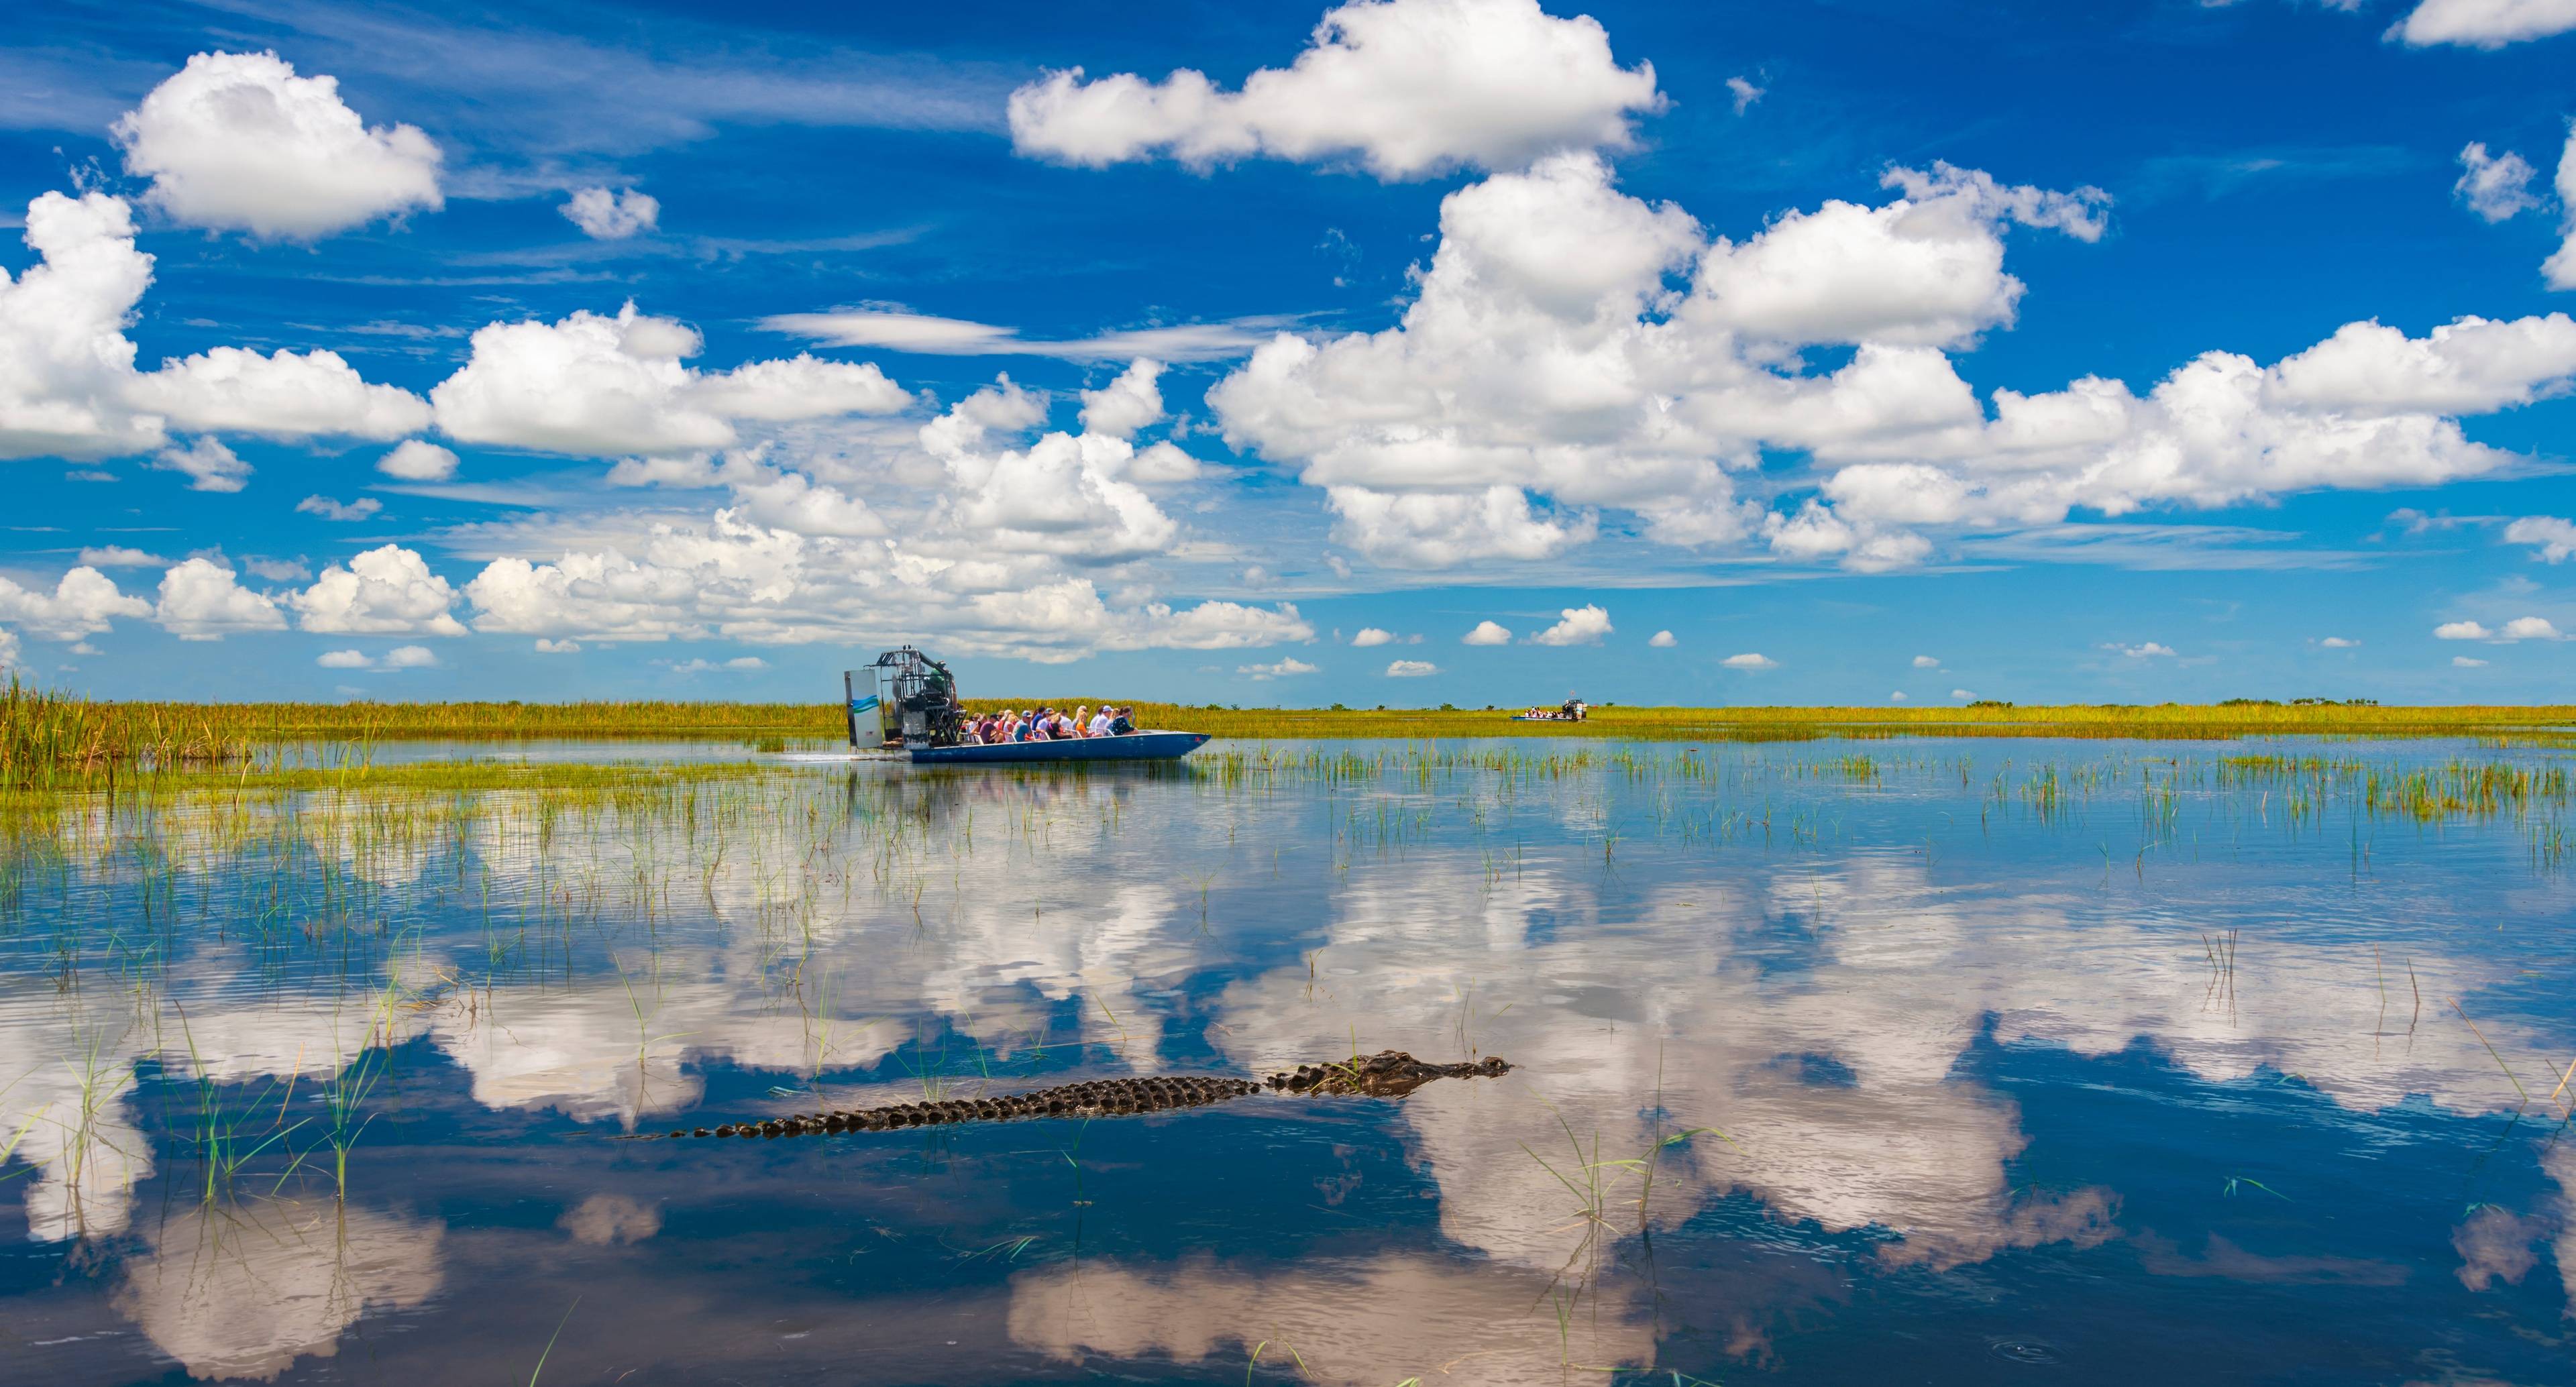 Get Up Close and Personal With Florida’s Everglades